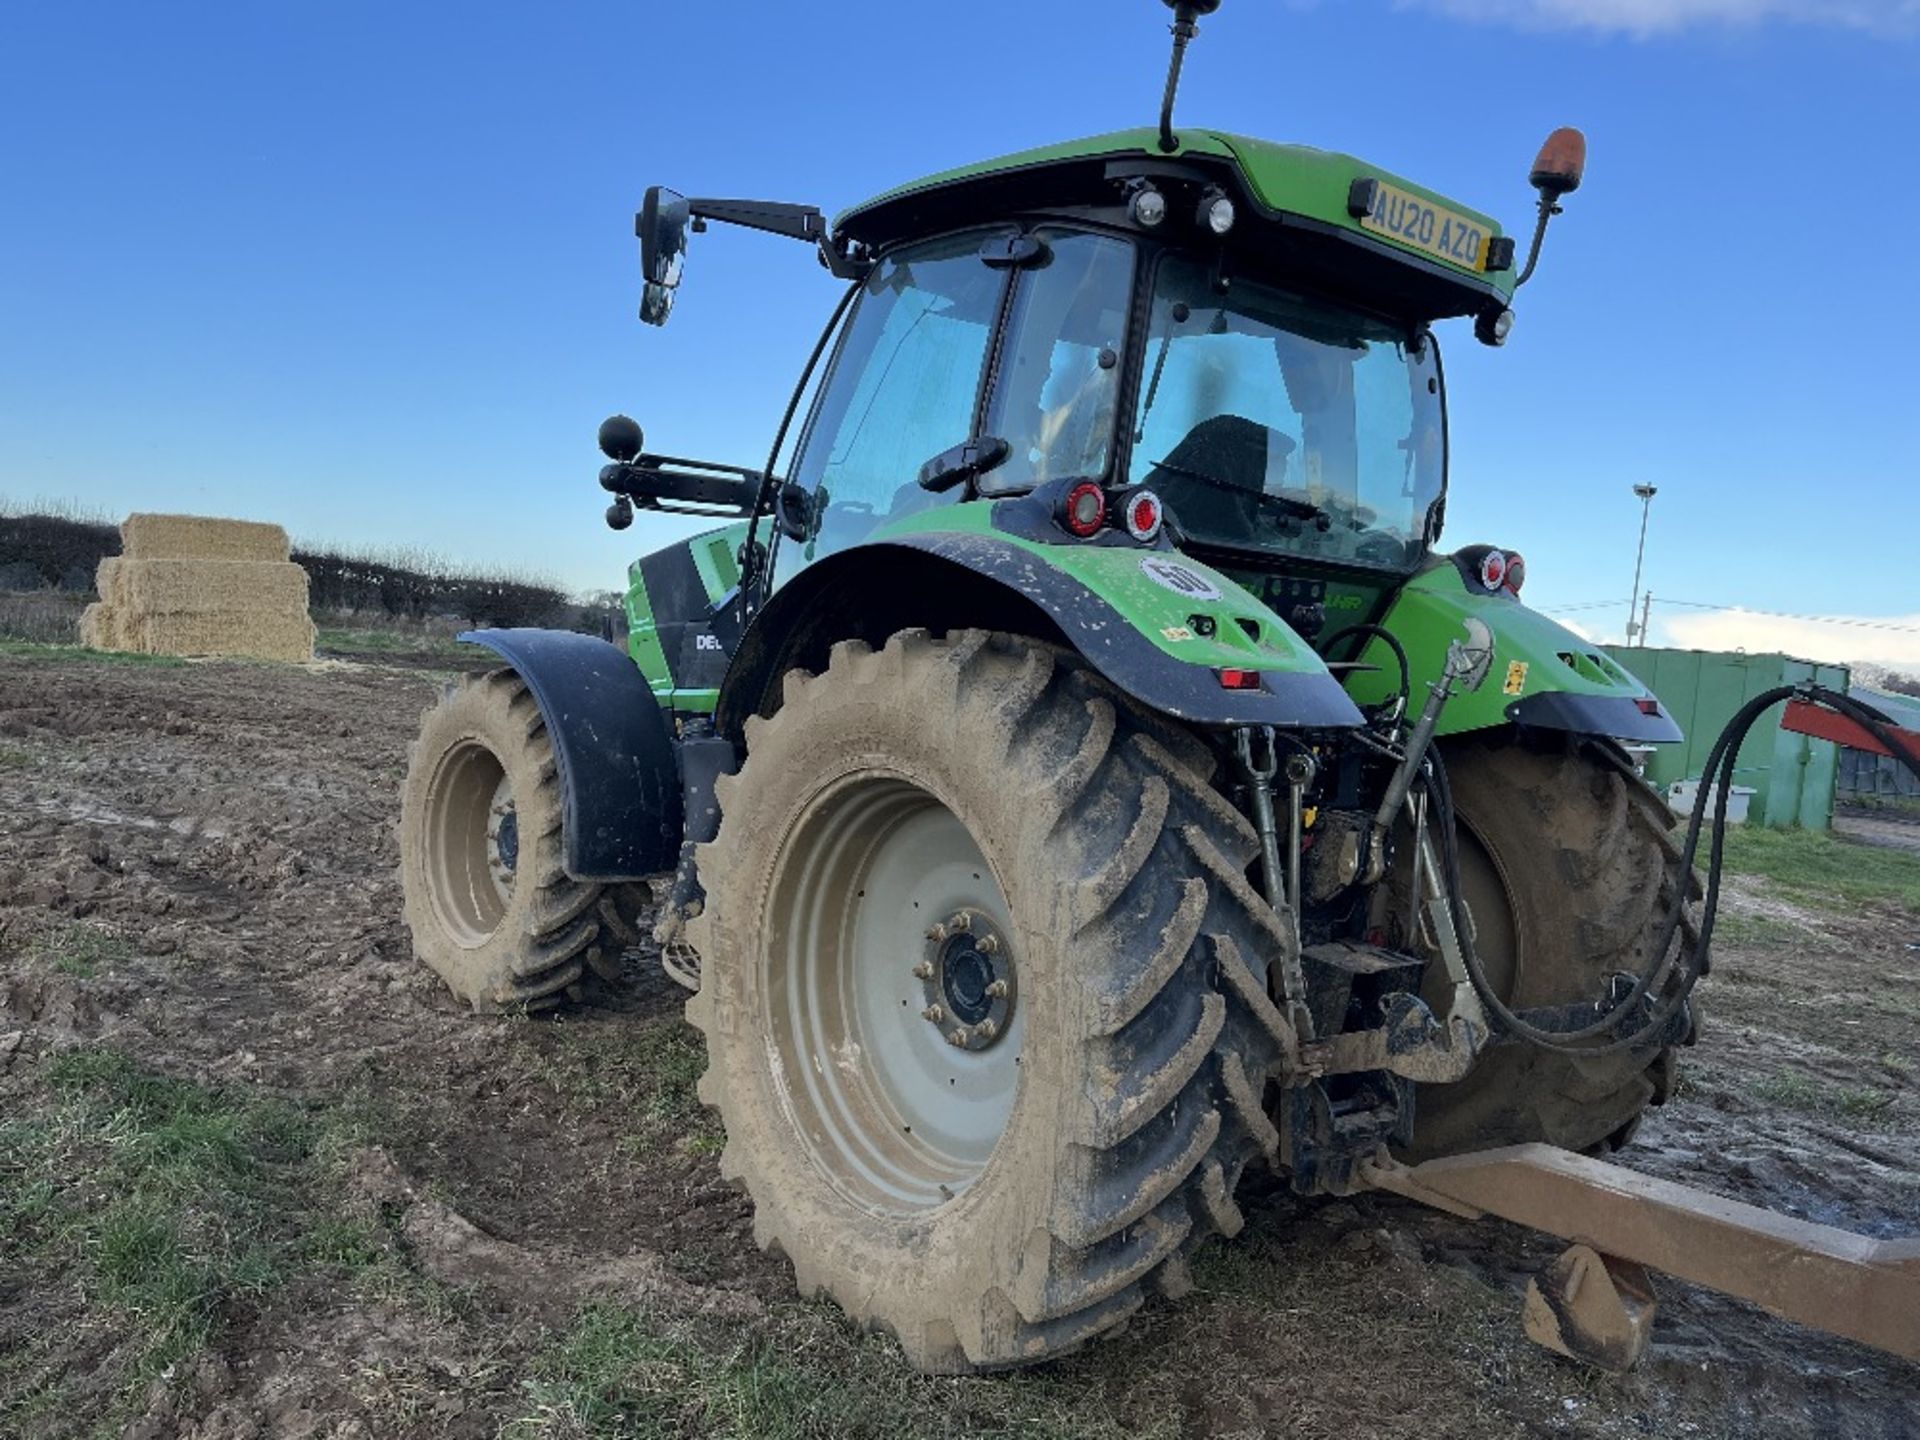 2020 Deutz Fahr 6140 4wd tractor Reg: AU20 AZO, 2526 hours, 540/65R38 Rear wheels and tyres, - Image 2 of 13